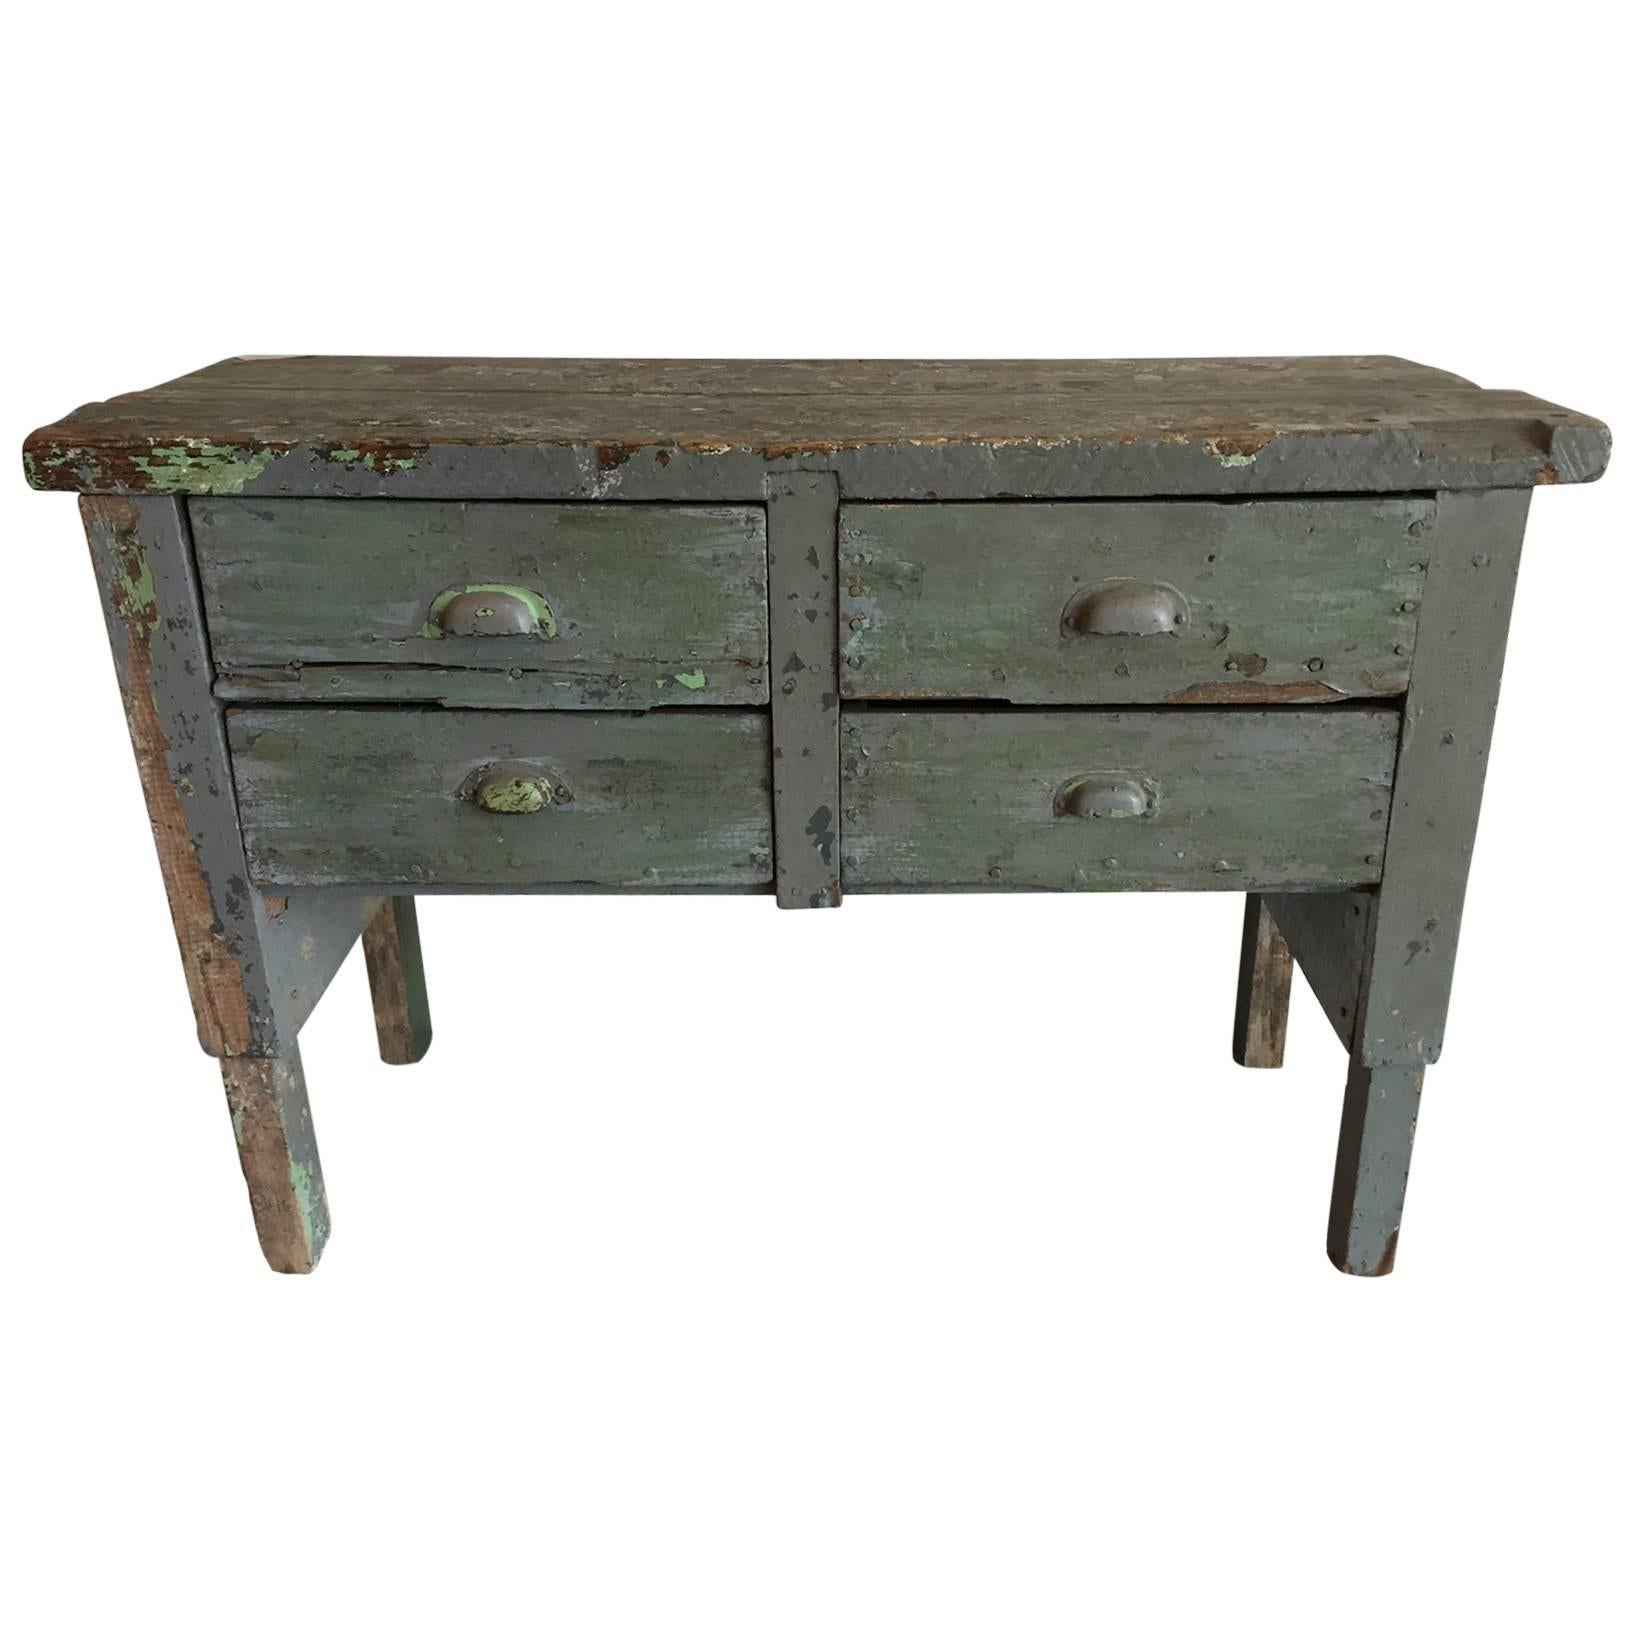 19th Century Wooden Work Table with Drawers For Sale